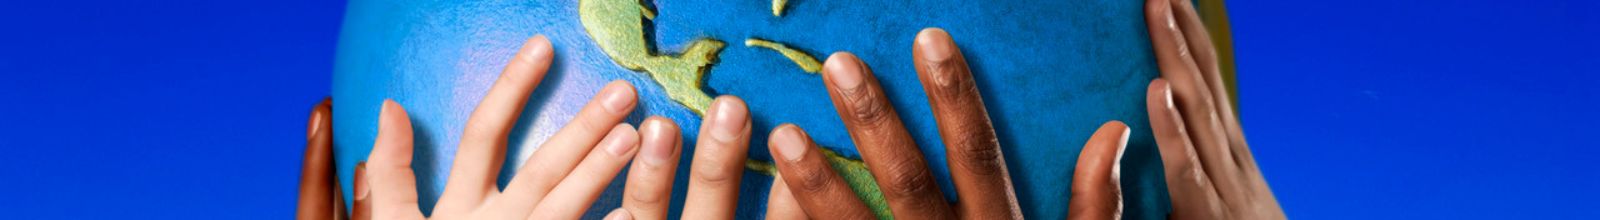 A group of diverse hands hold up a model of the Earth 